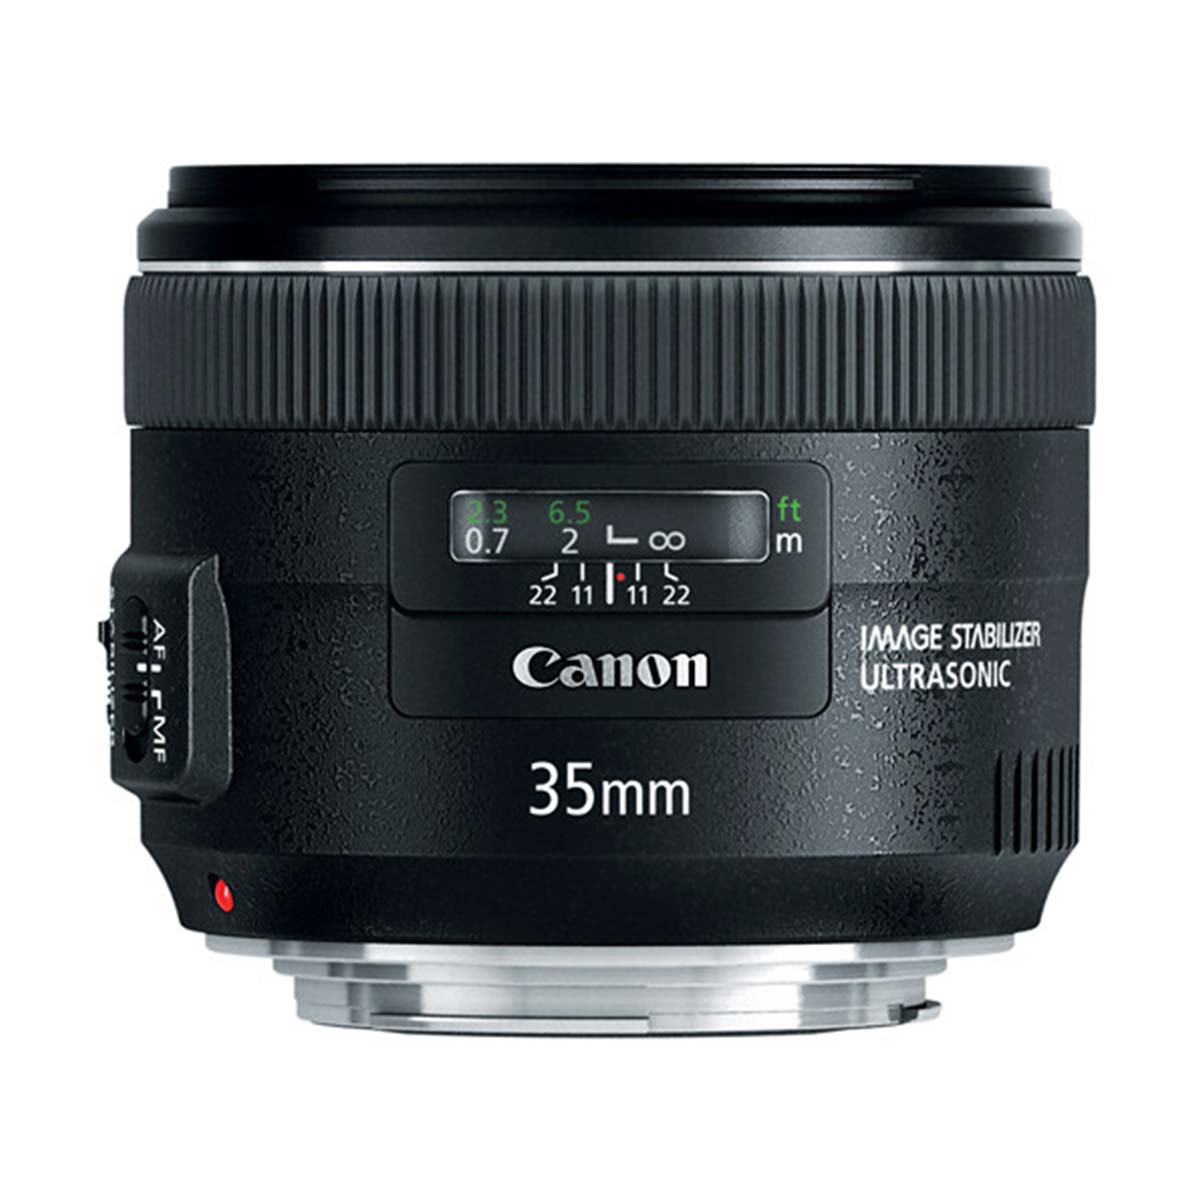 Canon EF 35mm f2.0 IS Lens *OPEN BOX*